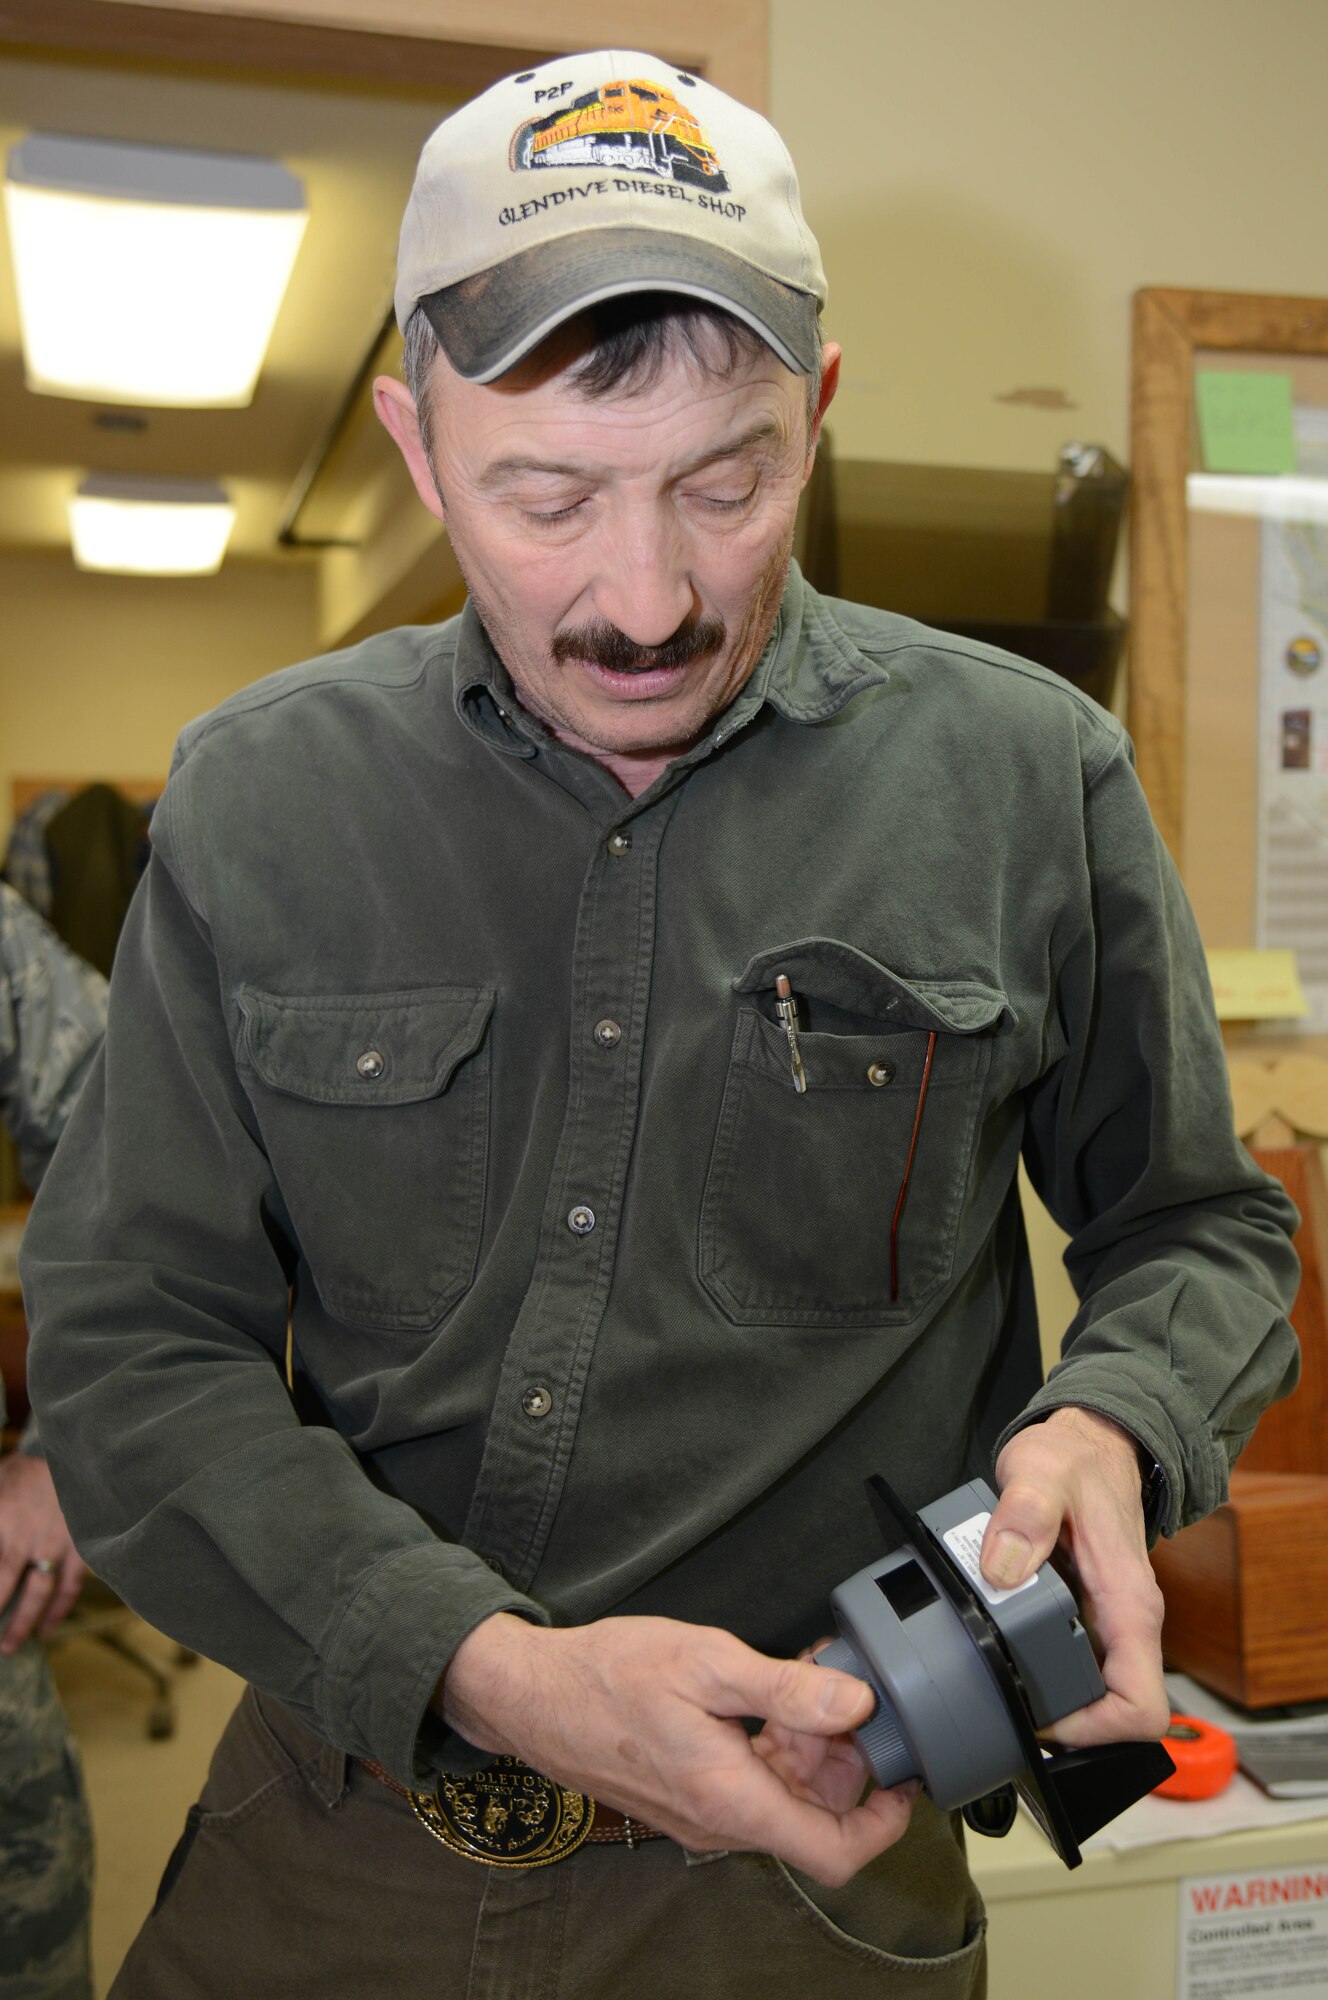 Jeff Kaul, 341st Civil Engineer Squadron locksmith, demonstrates how to use an electronic combination lock Feb. 3, 2015, at Malmstrom Air Force Base, Mont. Kaul maintains, installs and builds locks for all establishments on base. (U.S. Air Force photo/Airman 1st Class Dillon Johnston)